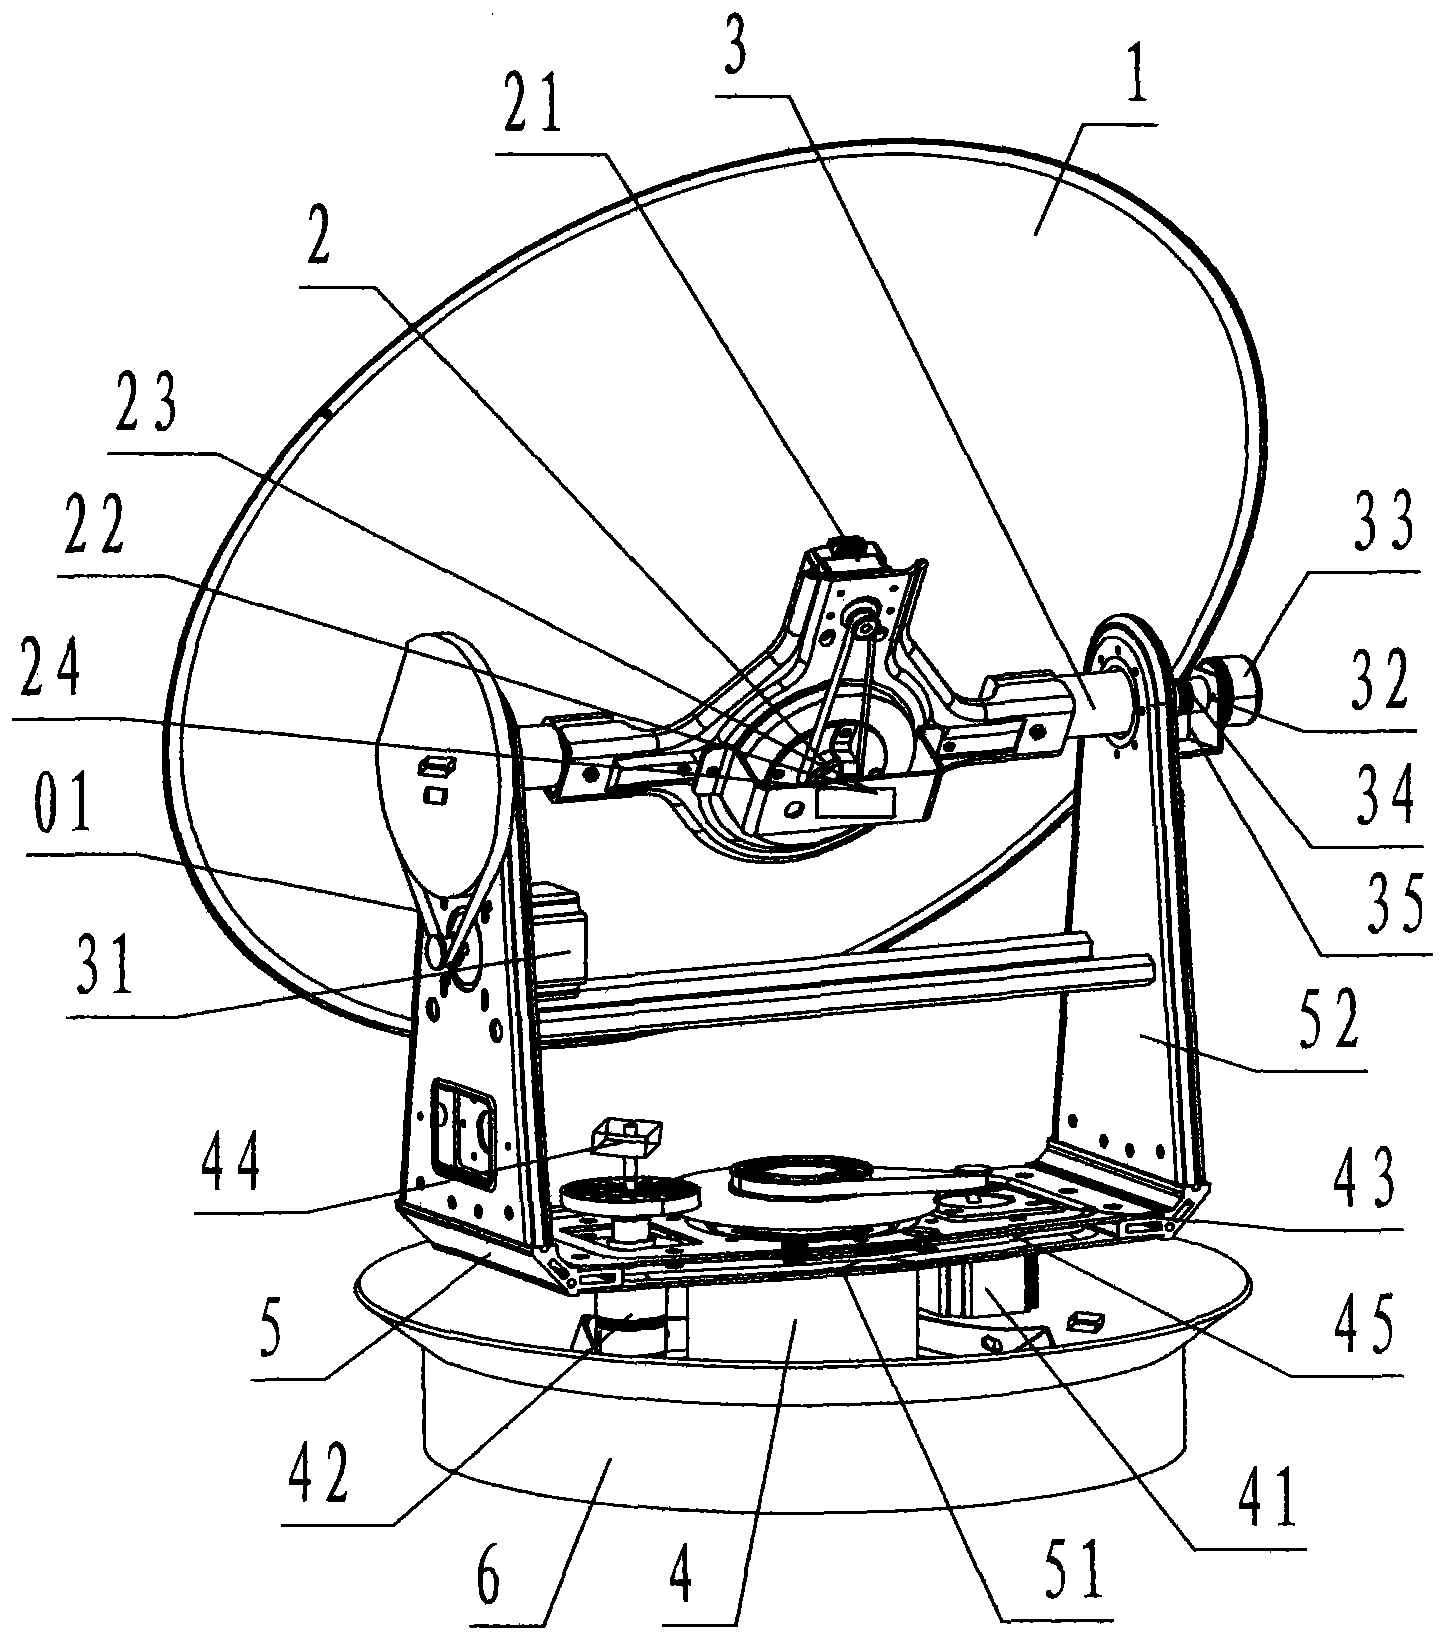 Three-axis stable follow-up tracking device of shipborne satellite antenna